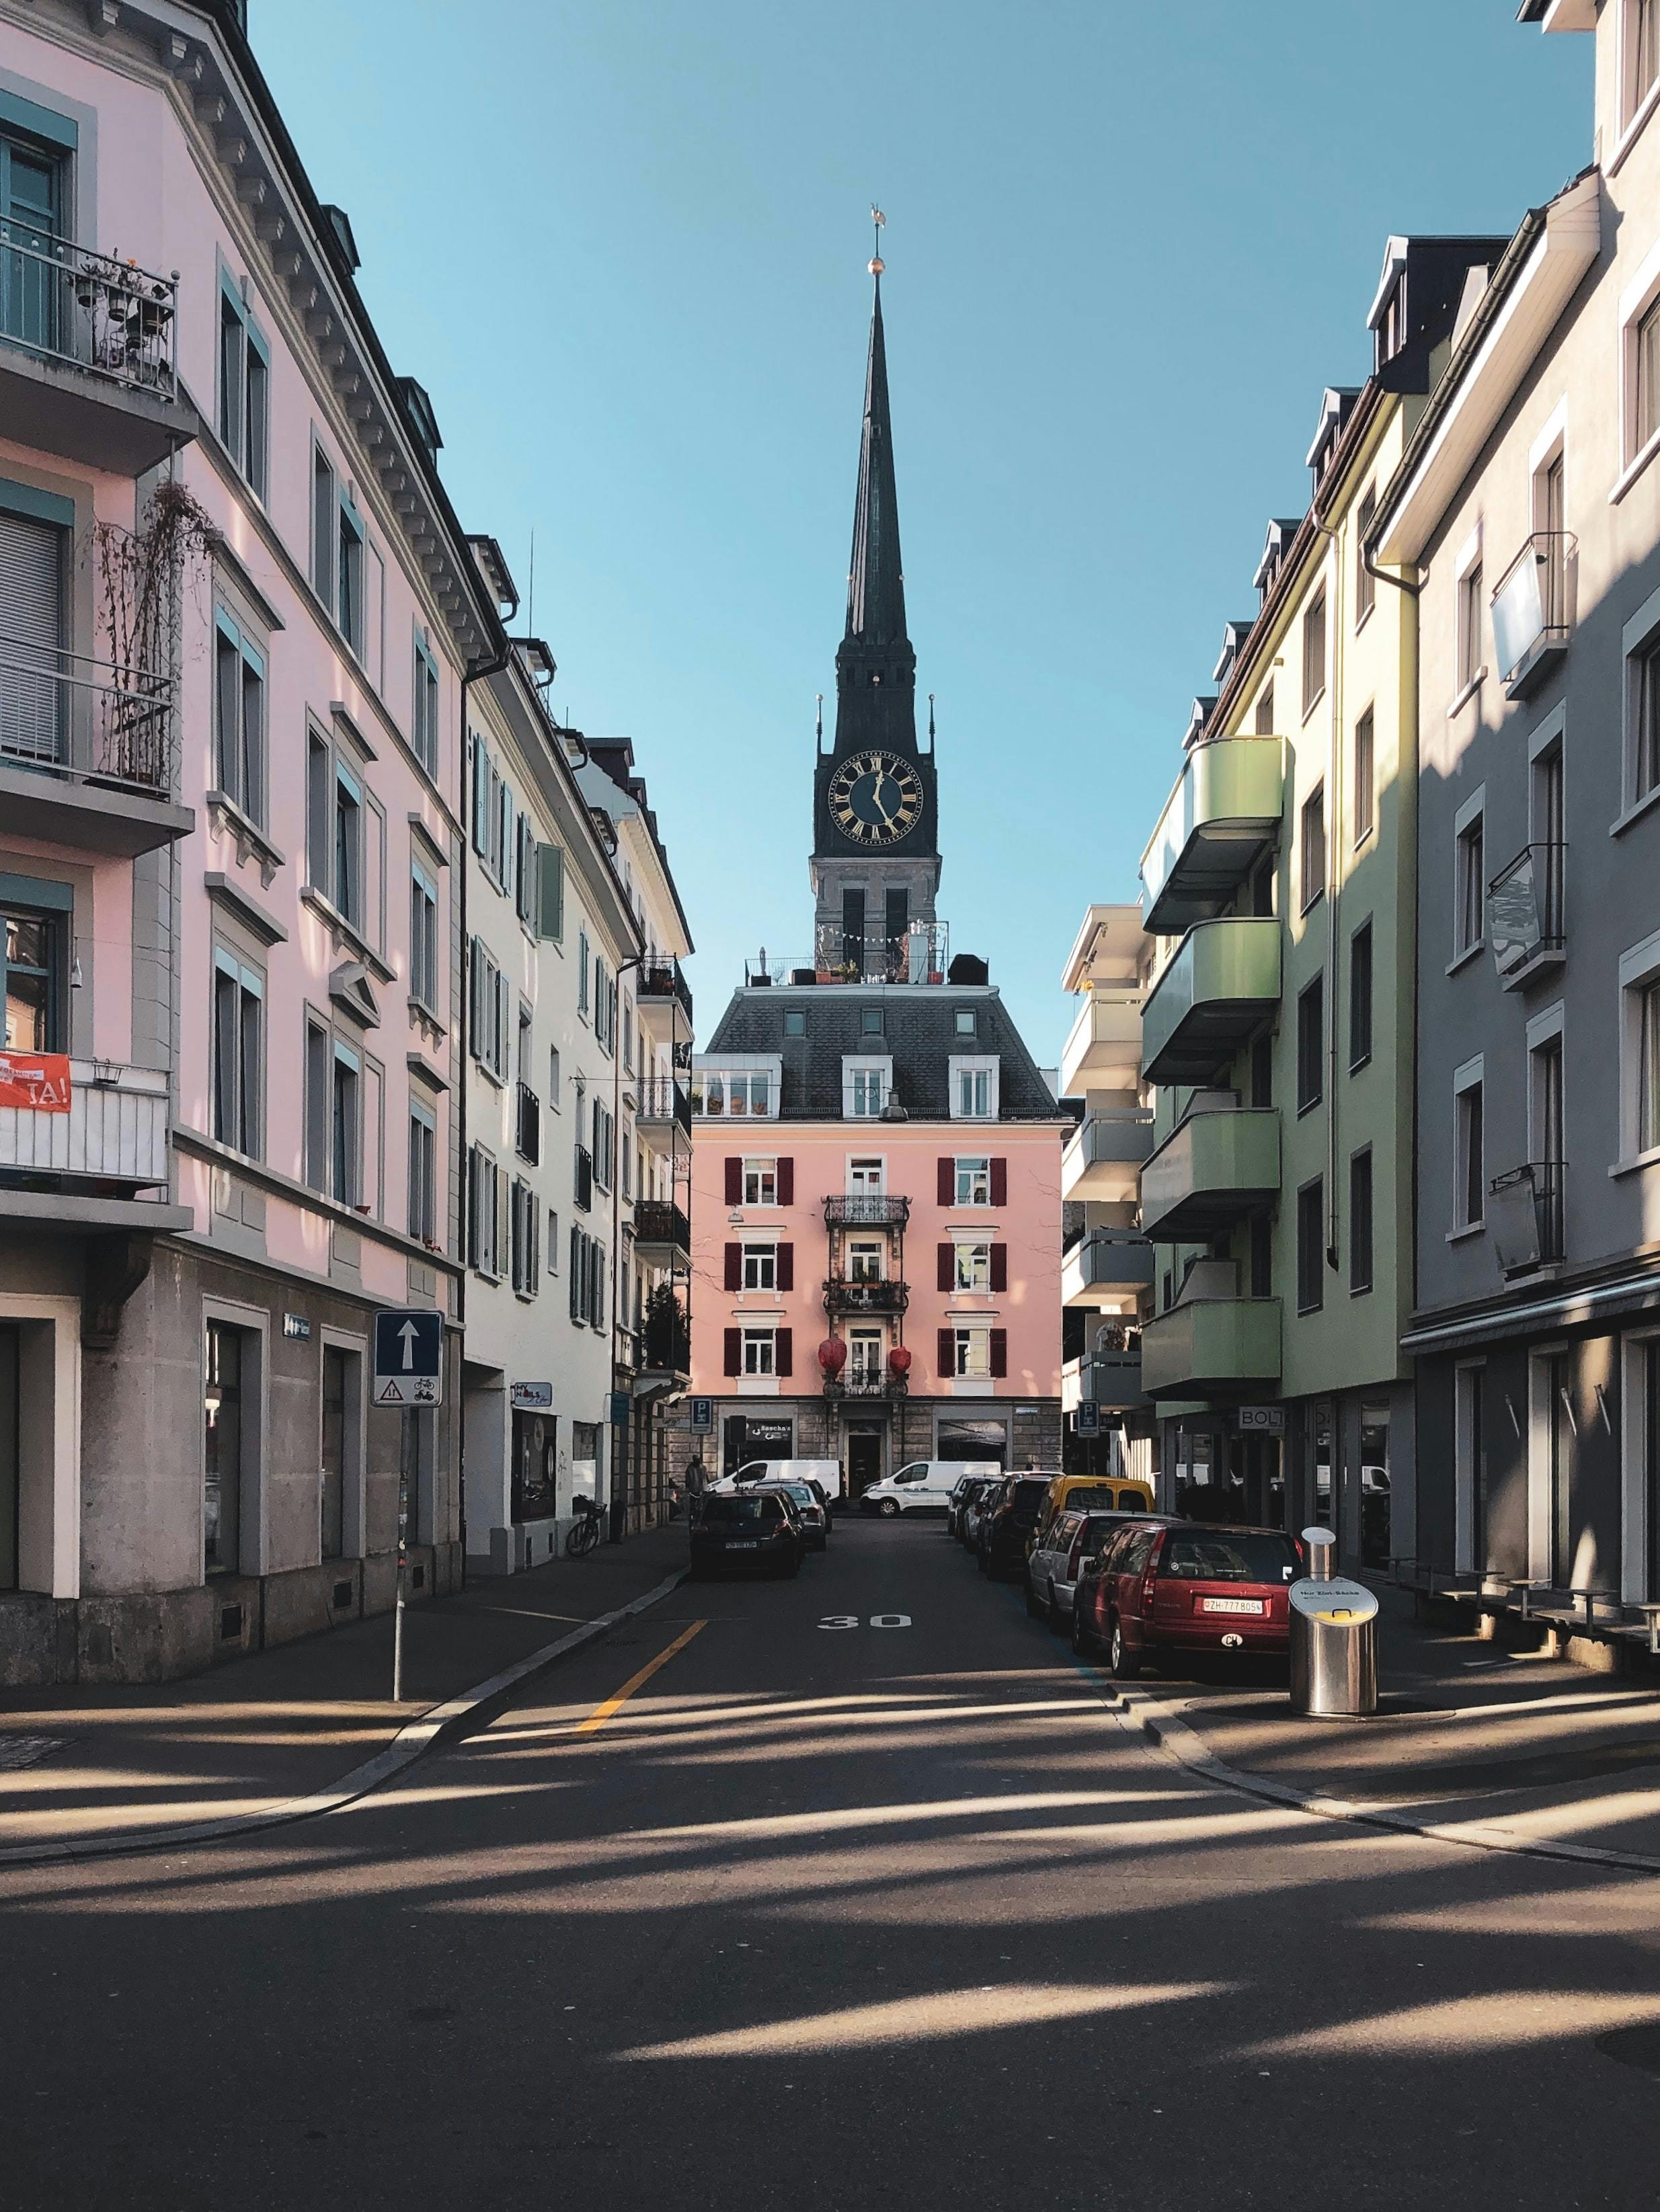 Explore Zurich in 1 hour with a local